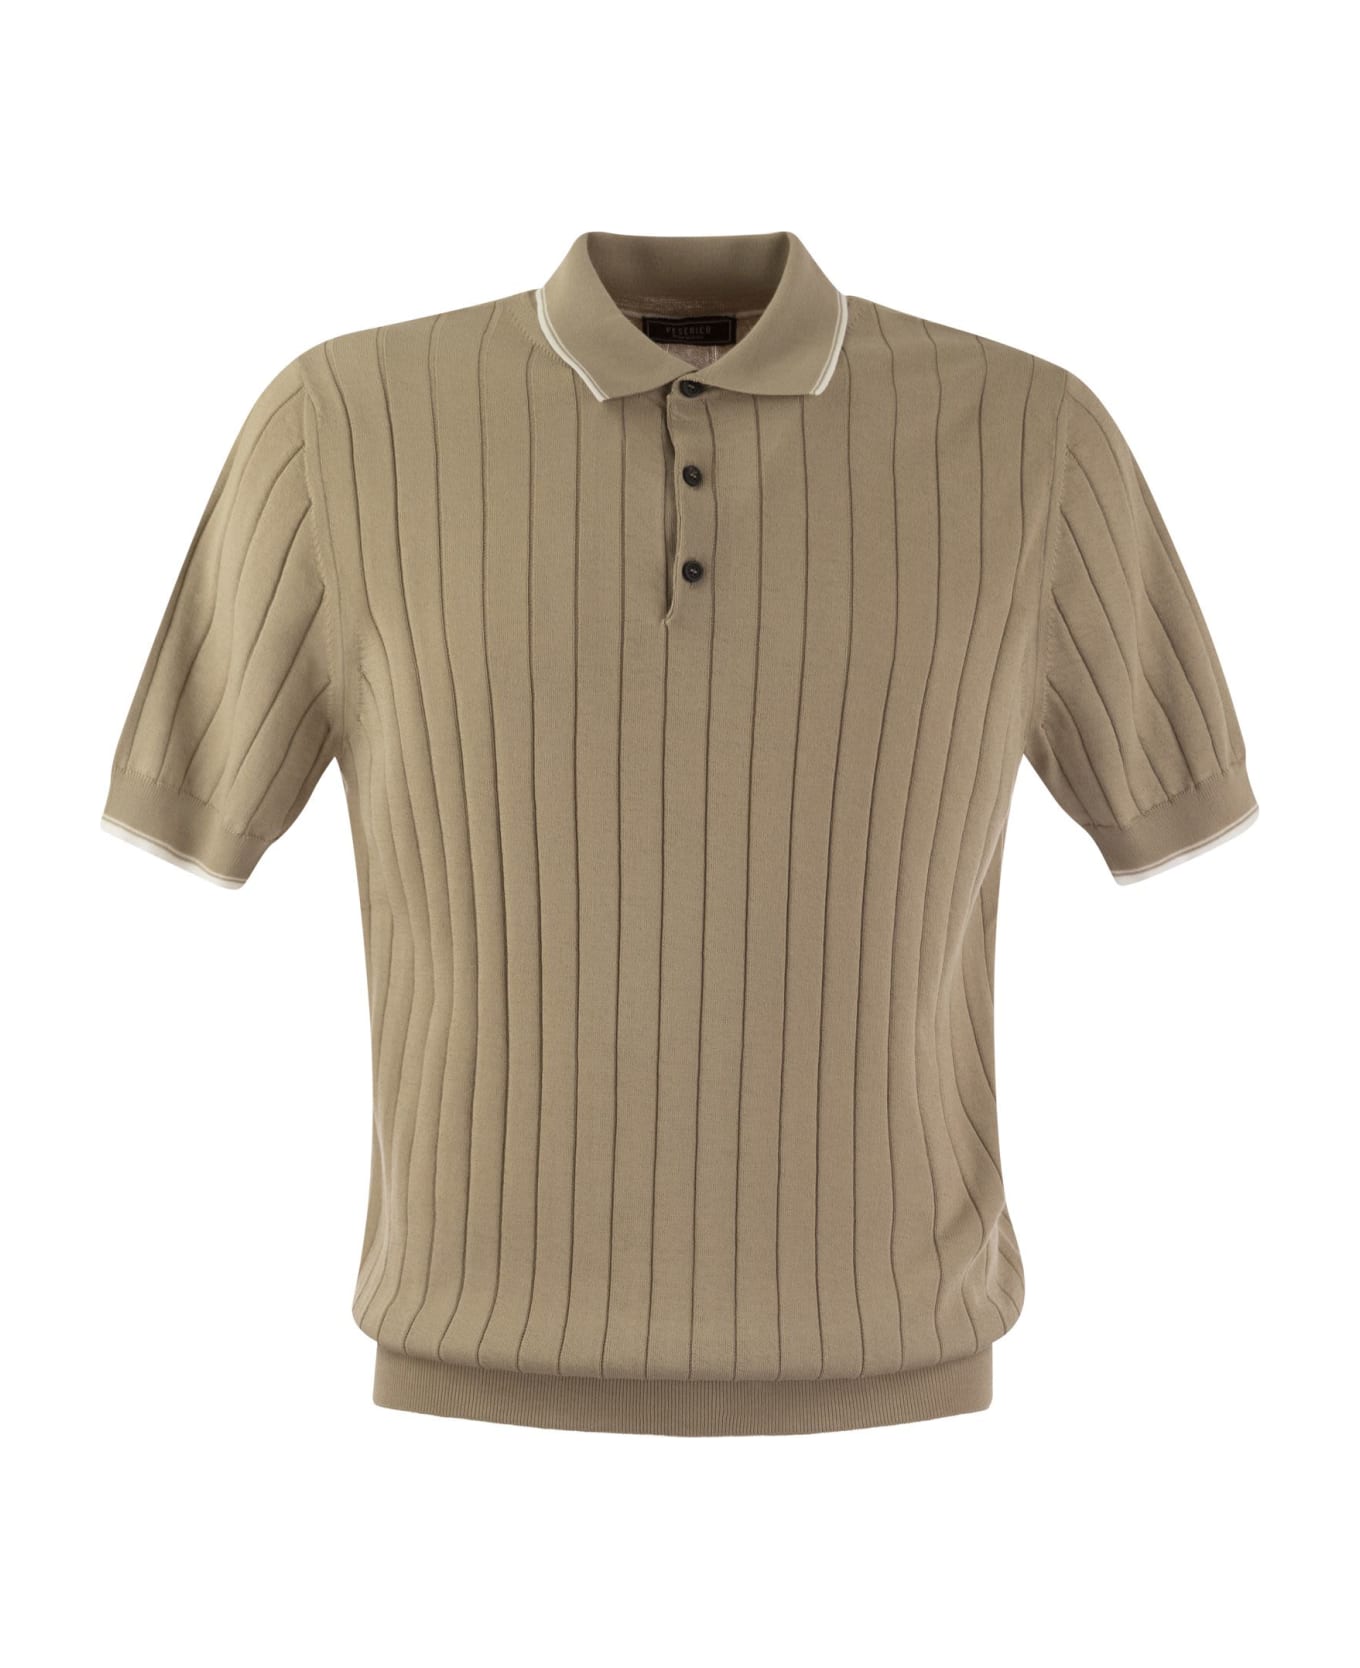 Peserico Polo Shirt In Pure Cotton Crepe Yarn With Flat Rib - Beige/white